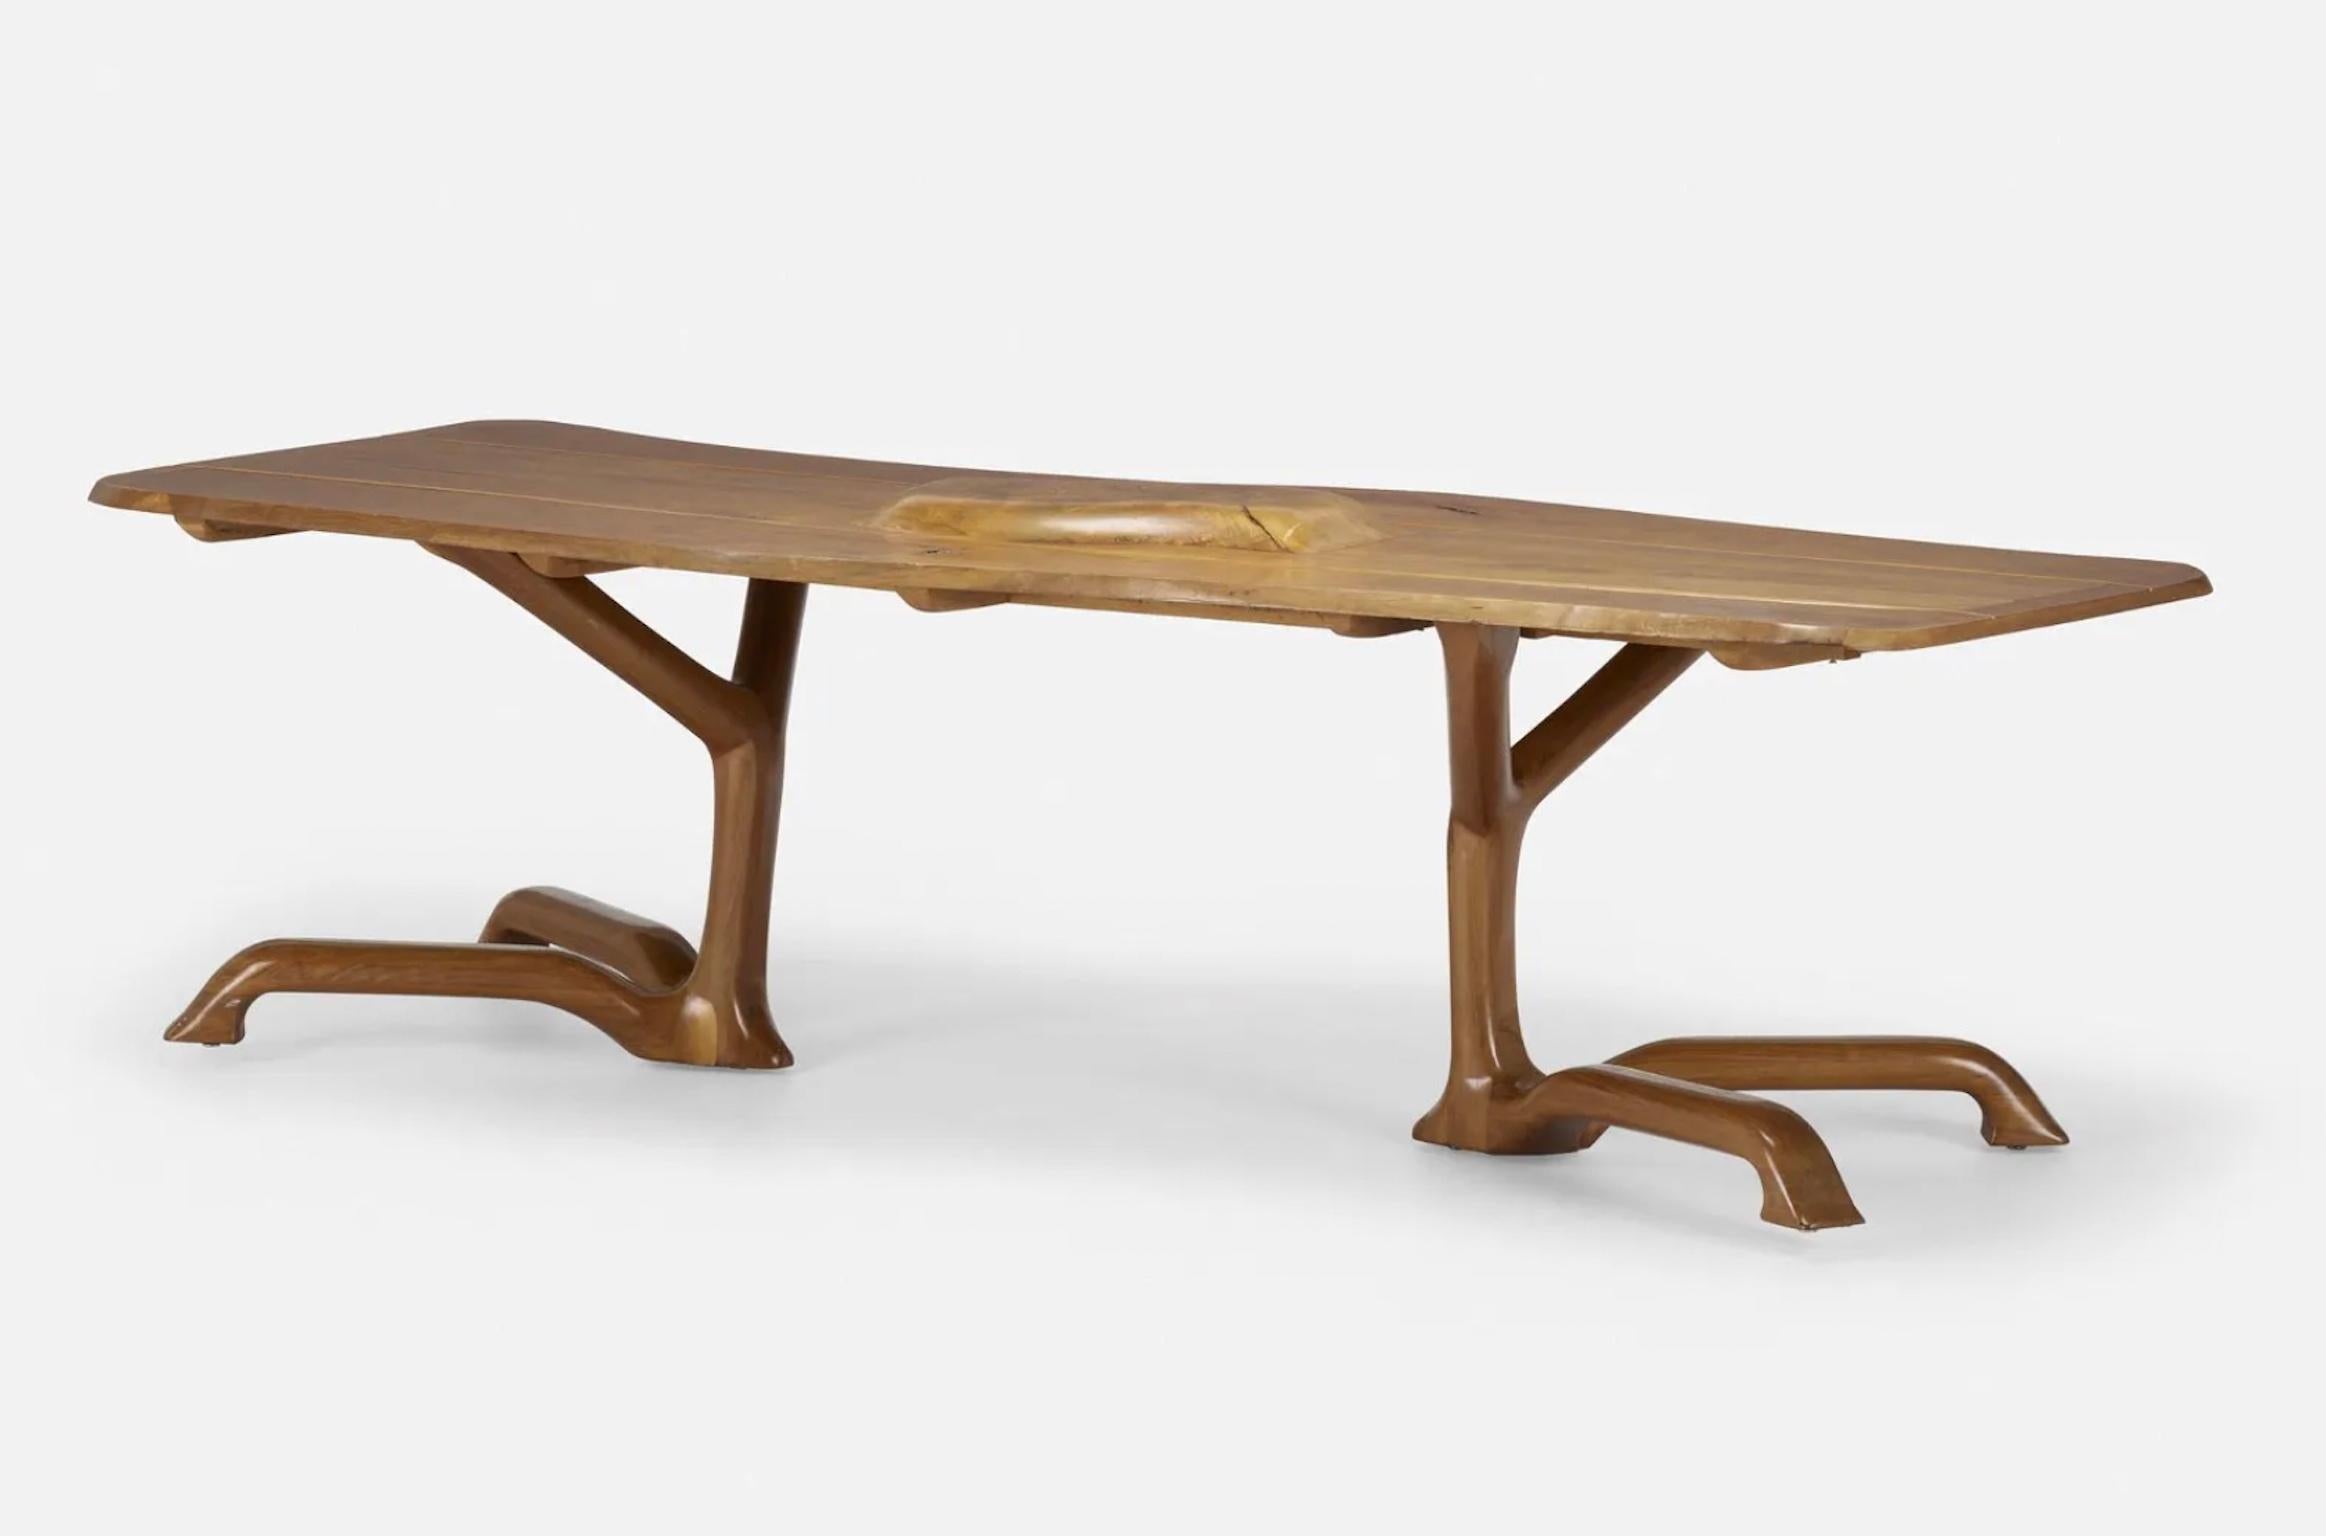 Mid-Century Modern Whimsical Handcrafted Organic Studio Craft Dining Table 1974 by Ejner Pagh For Sale